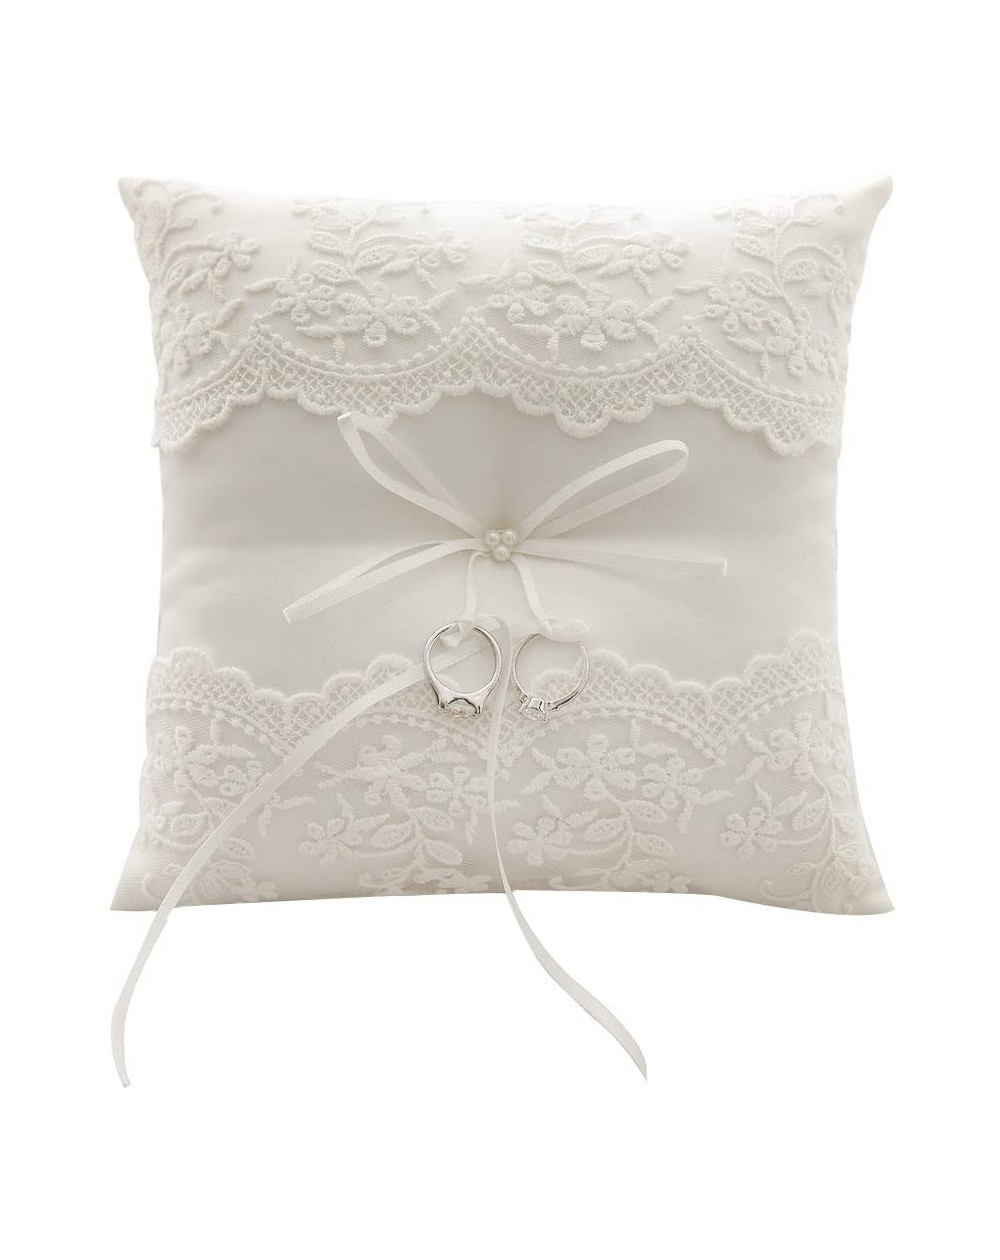 Ceremony Supplies Lace Pearl Wedding Ring Pillow Cushion Bearer 8.26 Inch For Beach wedding - C2183LAIOCK $24.44